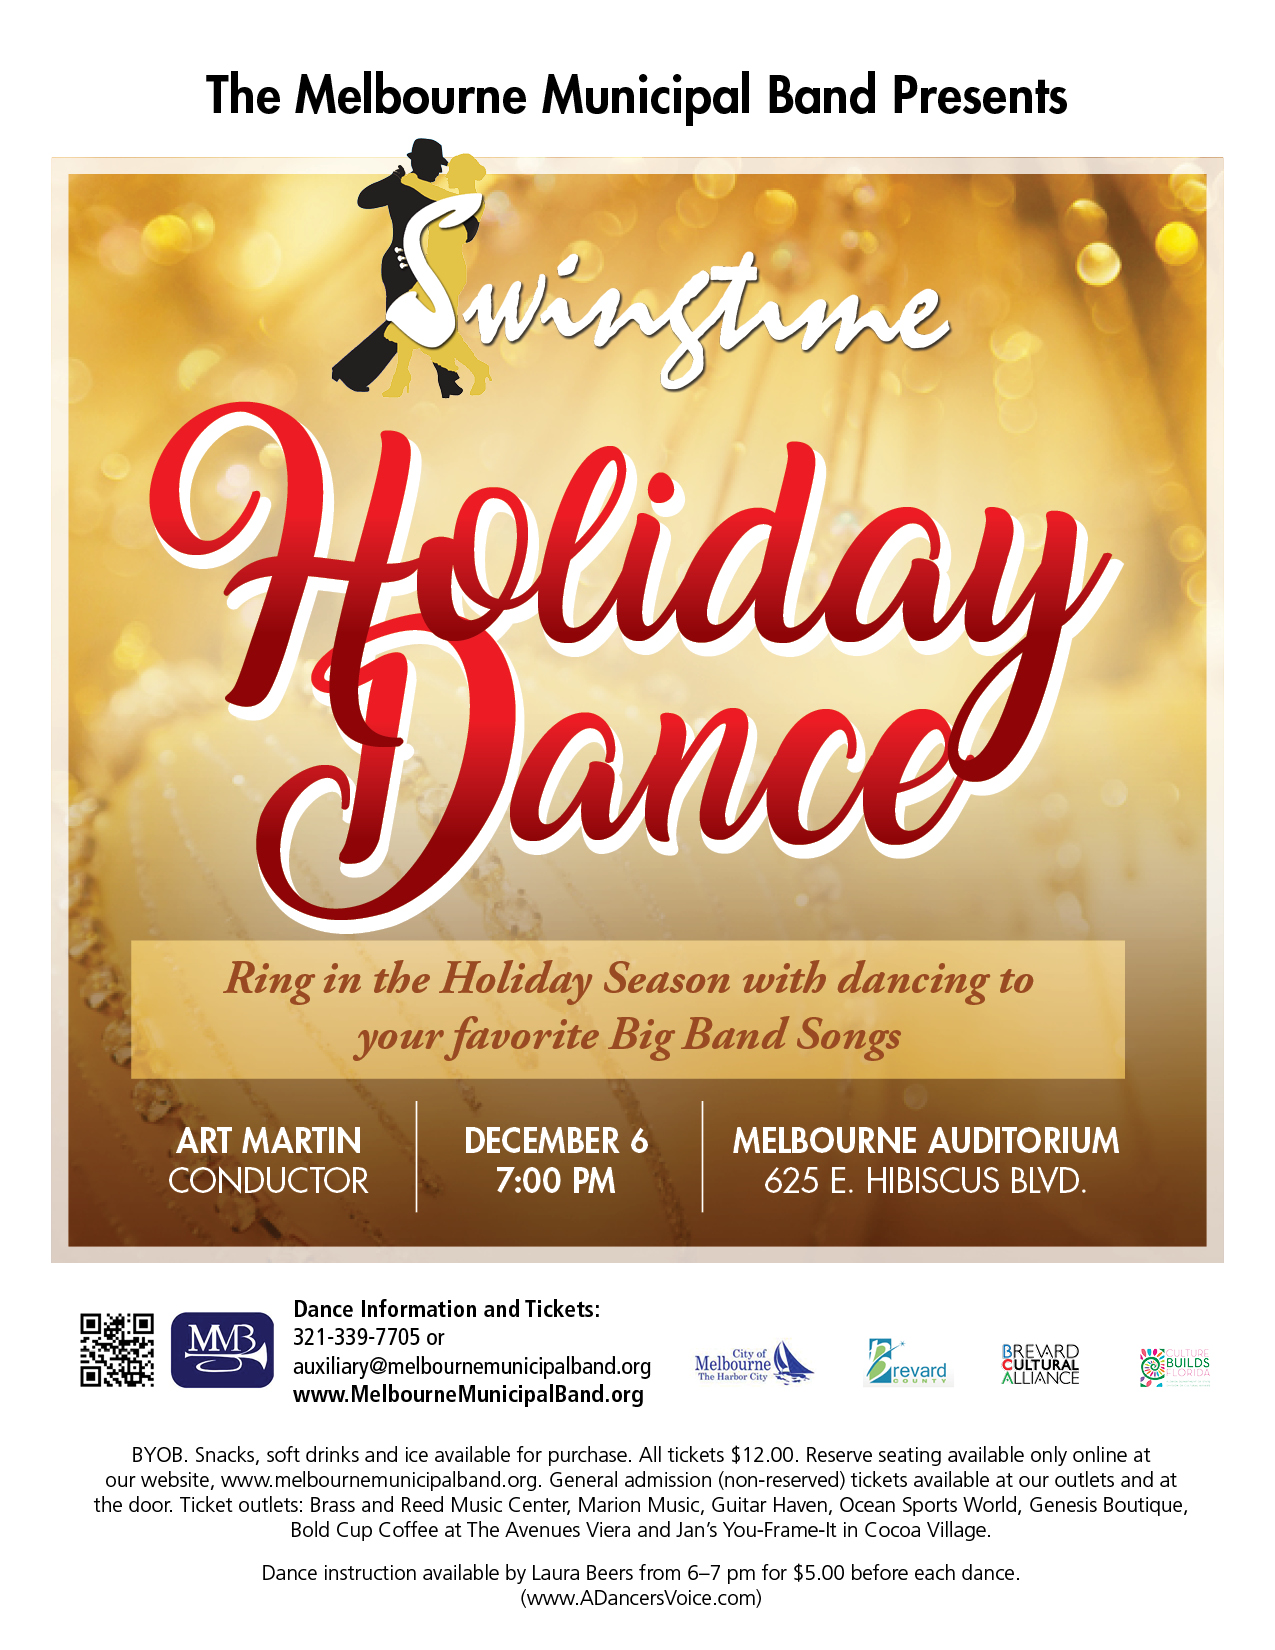 Swingtime Holiday Dance presented by The Melbourne Municipal Band